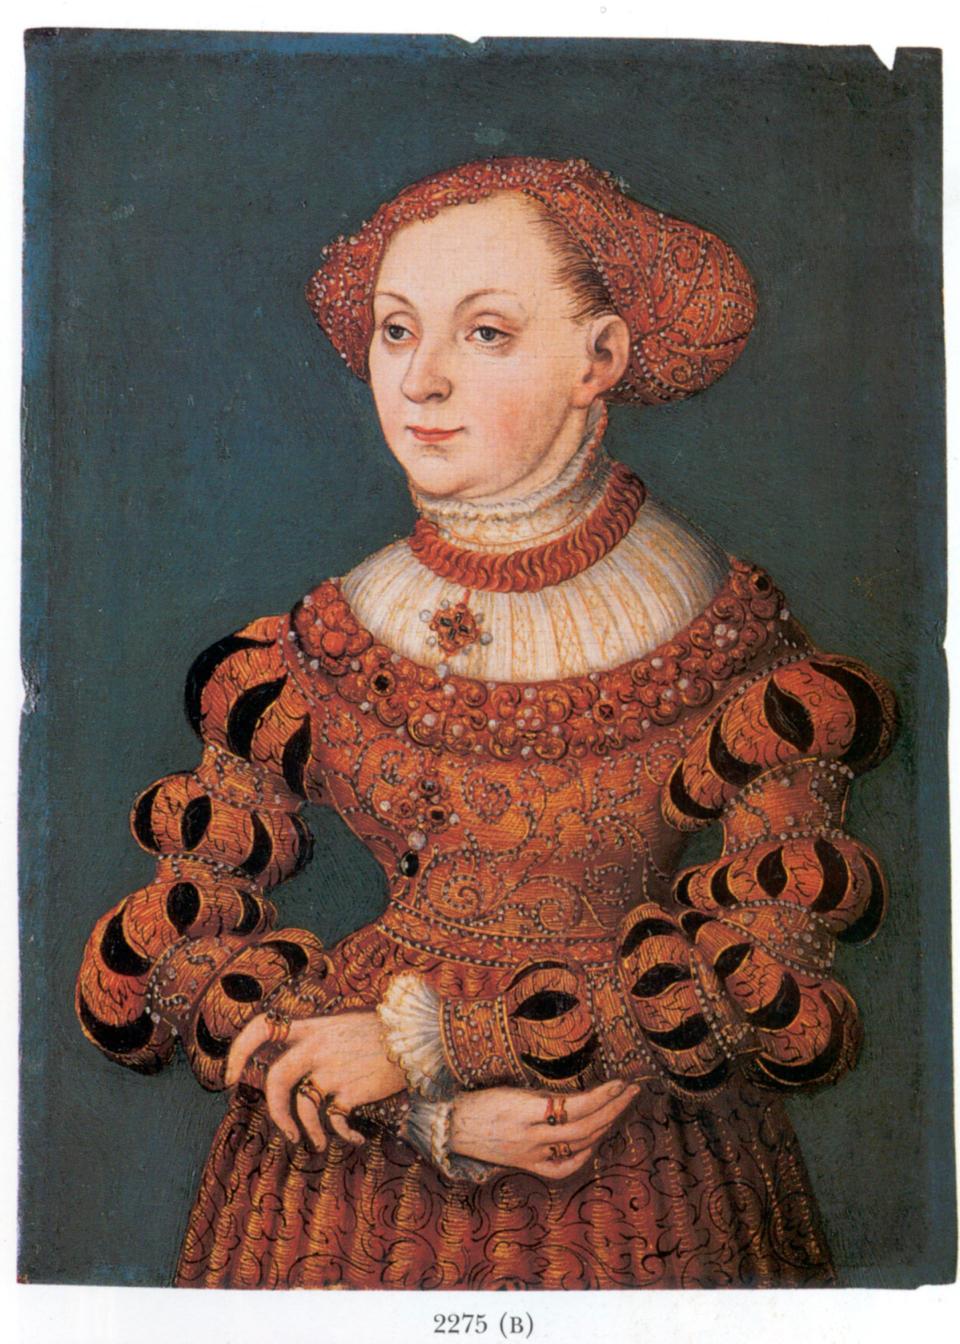 Sibylle of Cleves by Lucas Cranach the Younger, thought to be worth roughly $4.8 million, was perhaps the most valuable piece in Breitwieser’s collection.